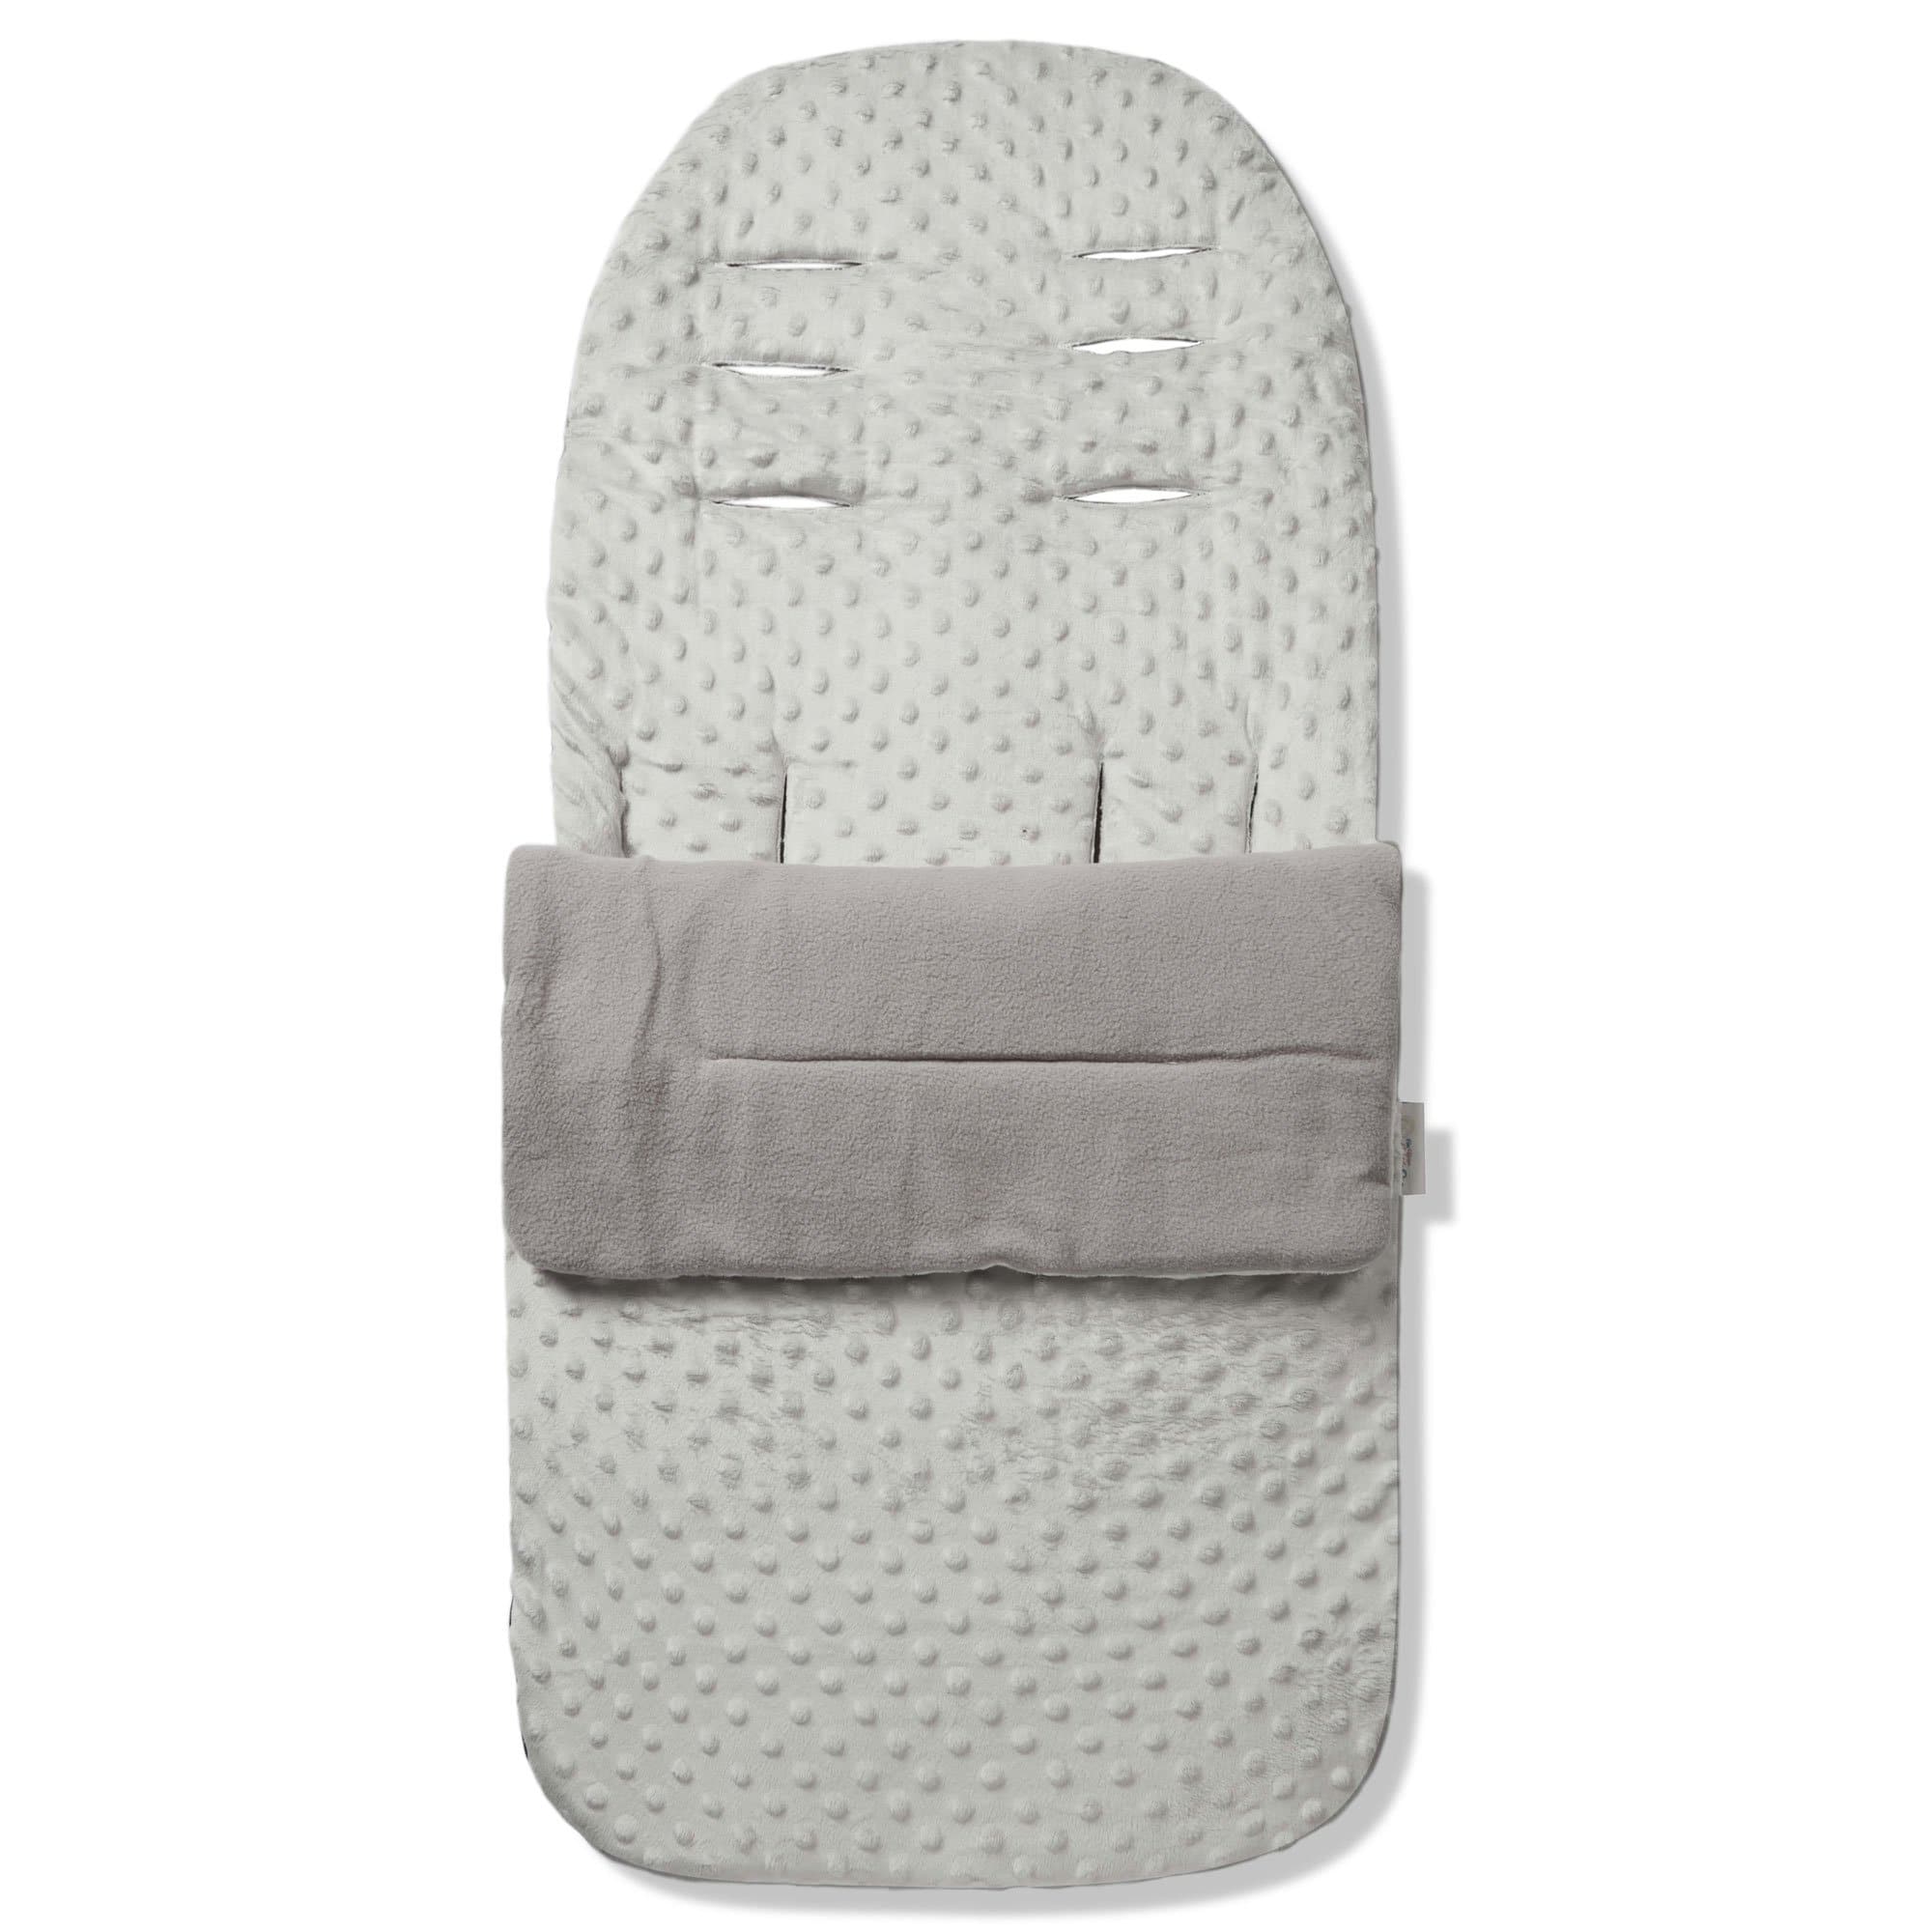 Dimple Footmuff / Cosy Toes Compatible with Brevi - Grey / Fits All Models | For Your Little One